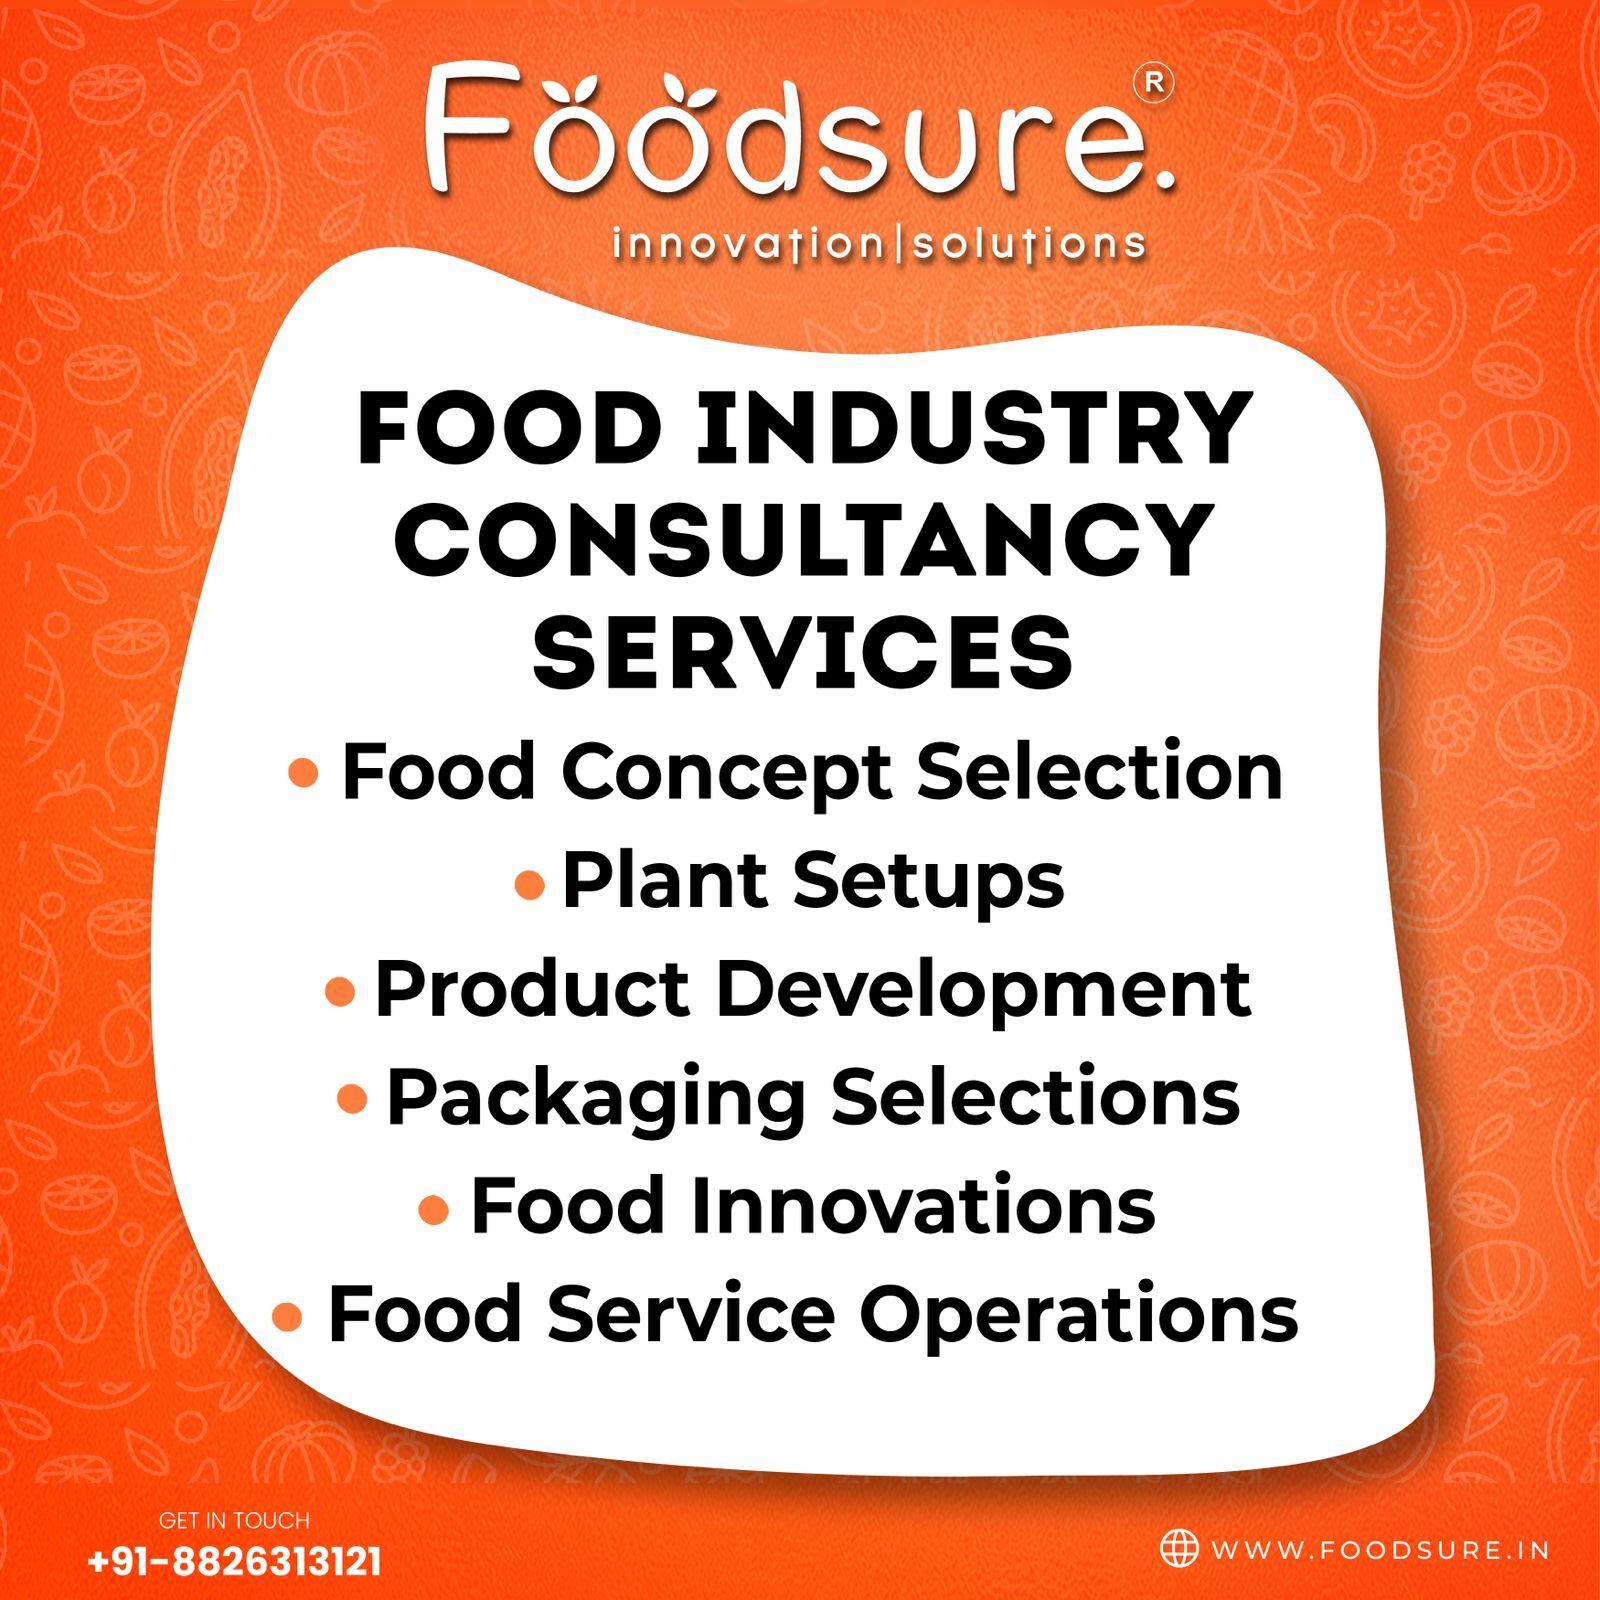 Food Industry Consultant